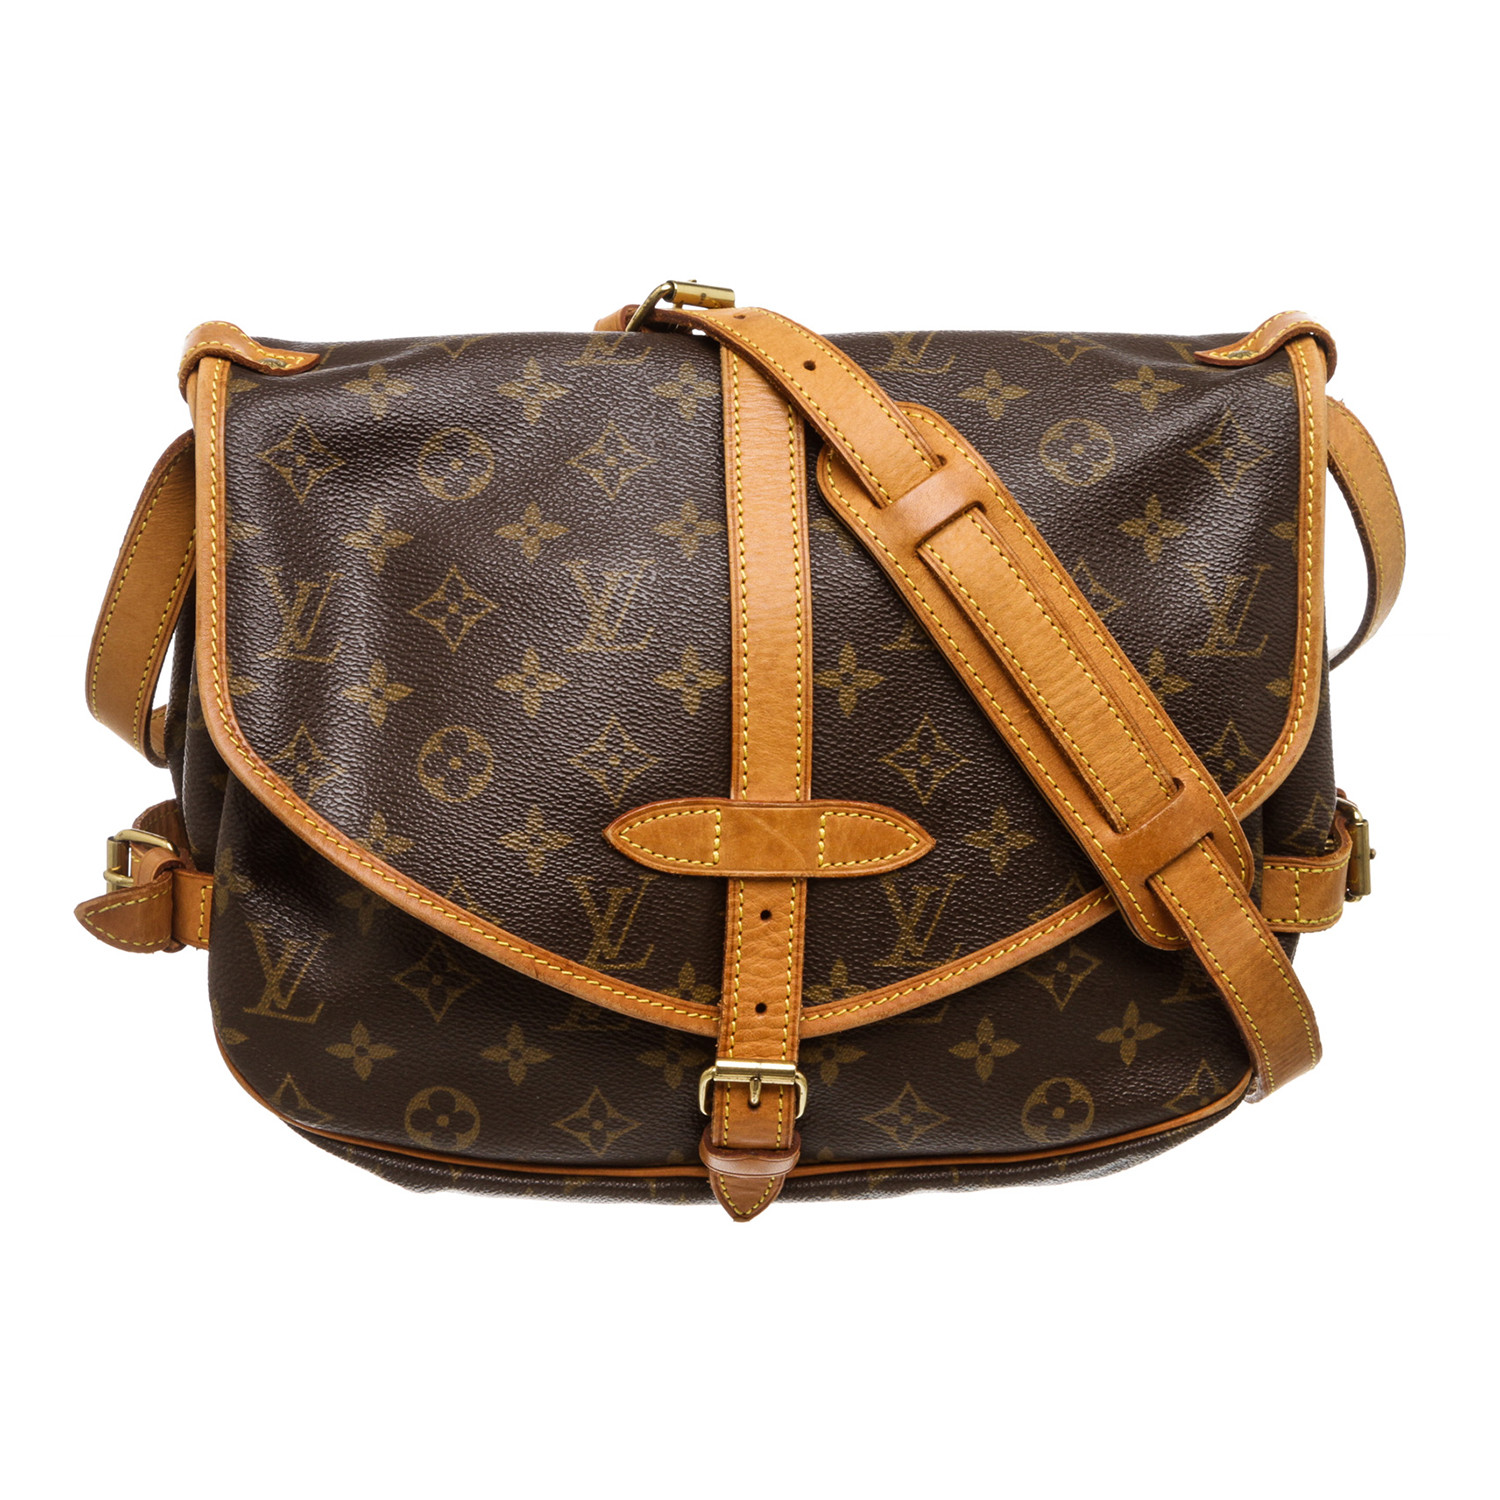 Louis Vuitton, A Louis Vuitton initial monogrammed vanity case with brass  metal mounts and brown leather trims